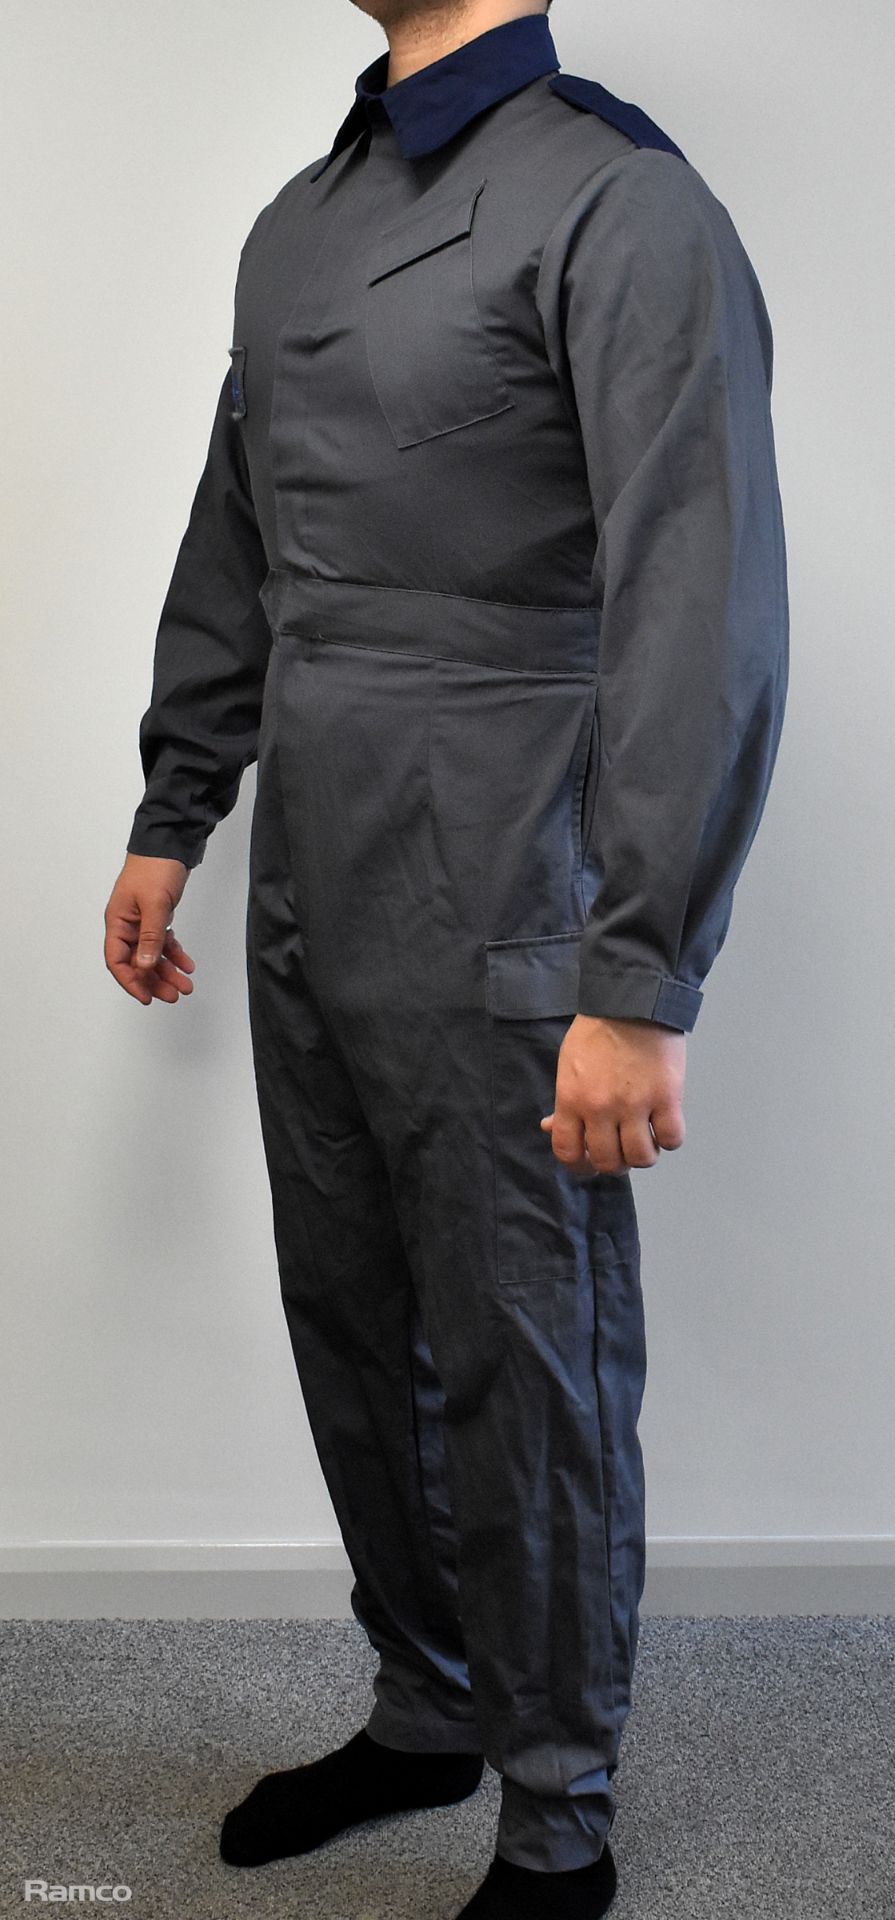 100x British Forces overalls - Blue / Grey - mixed sizes - Image 2 of 9